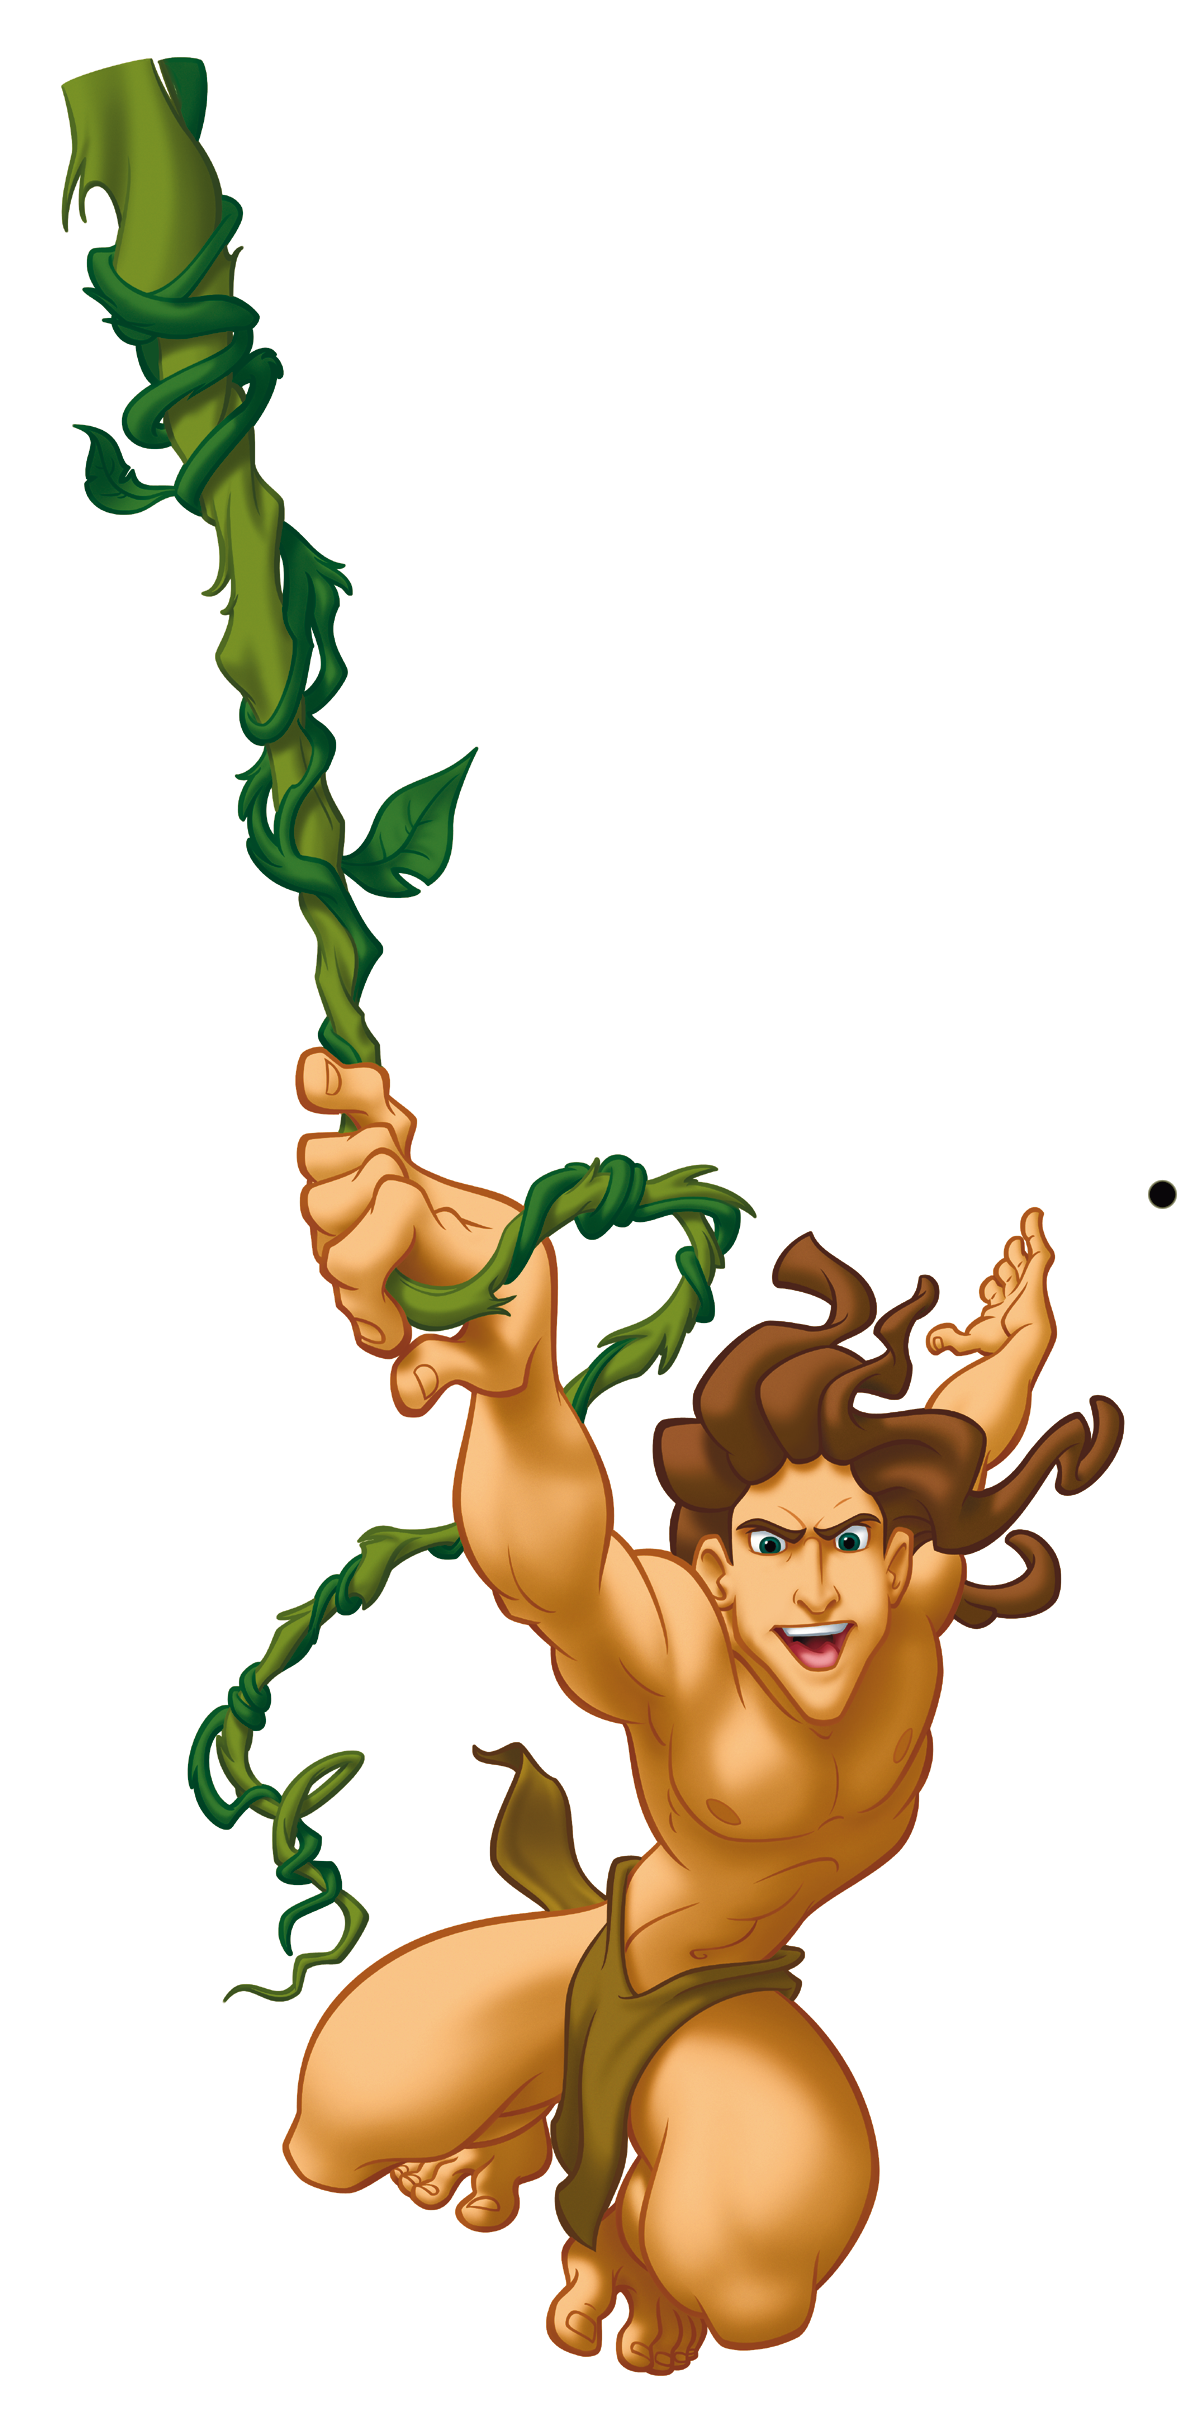 56. Found. clipart images for 'Tarzan'. 